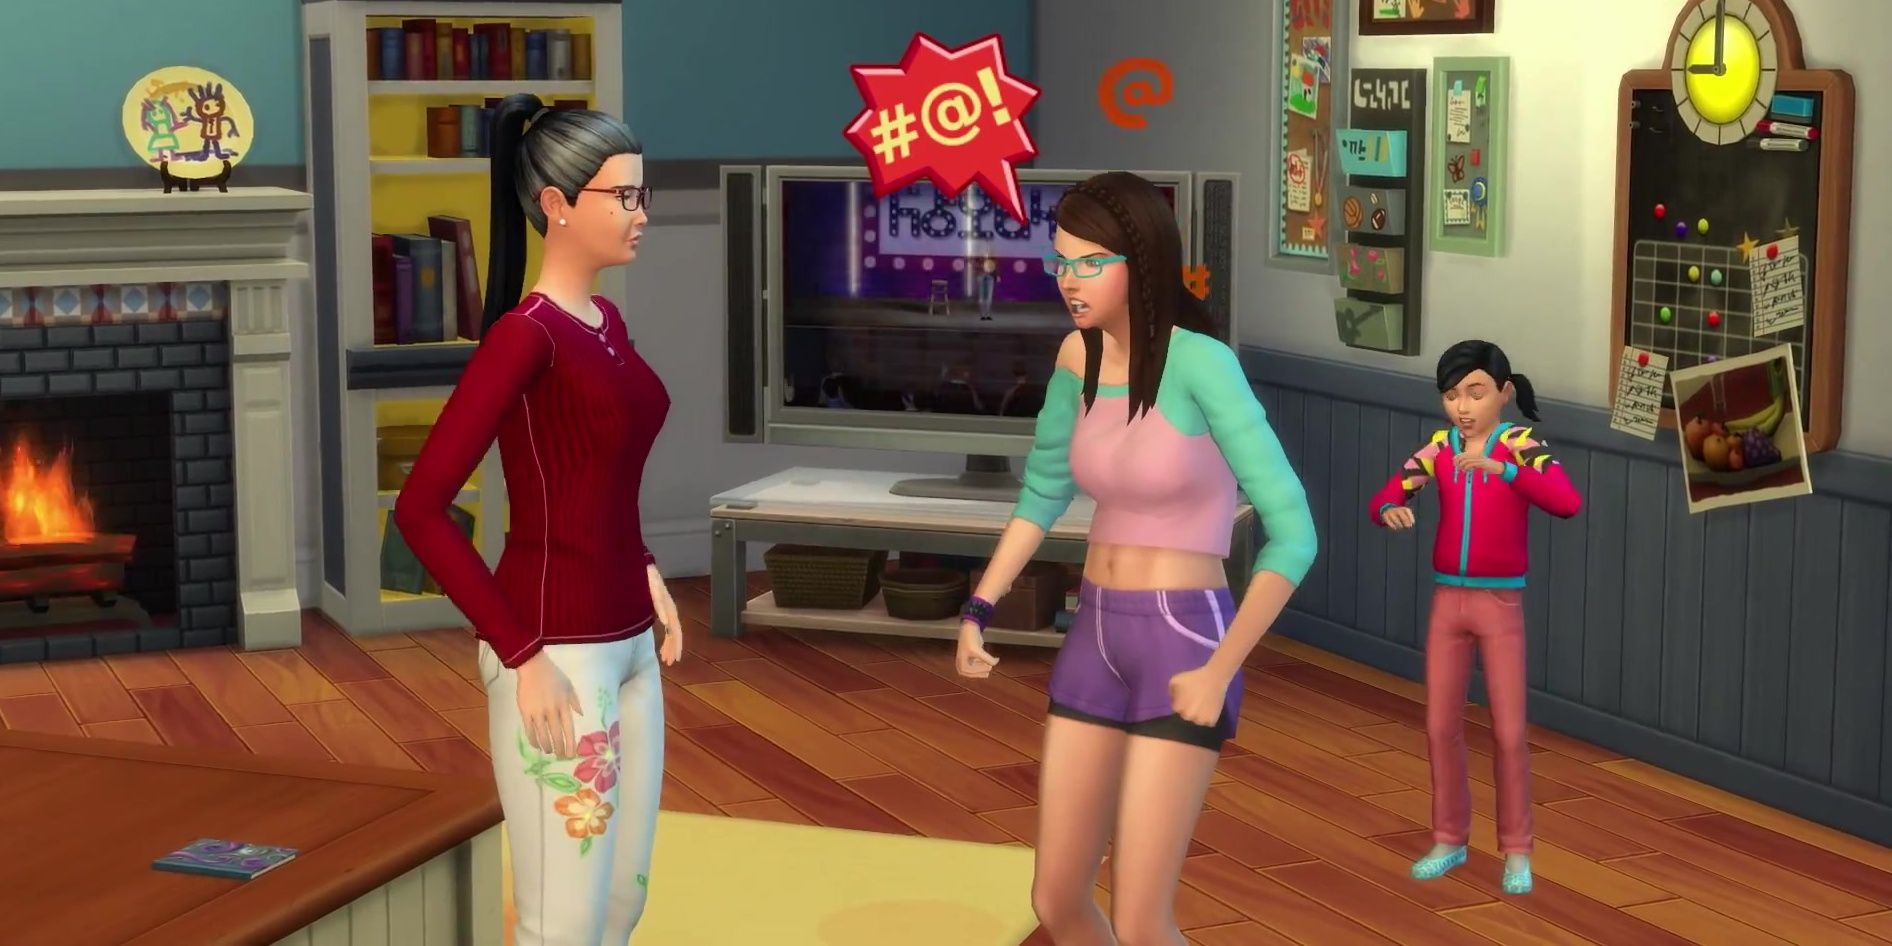 A teenage Sim shouts forbidden words as their parent looks less than pleased. Their younger sibling, on the other hands, looks to be enjoying the show. 